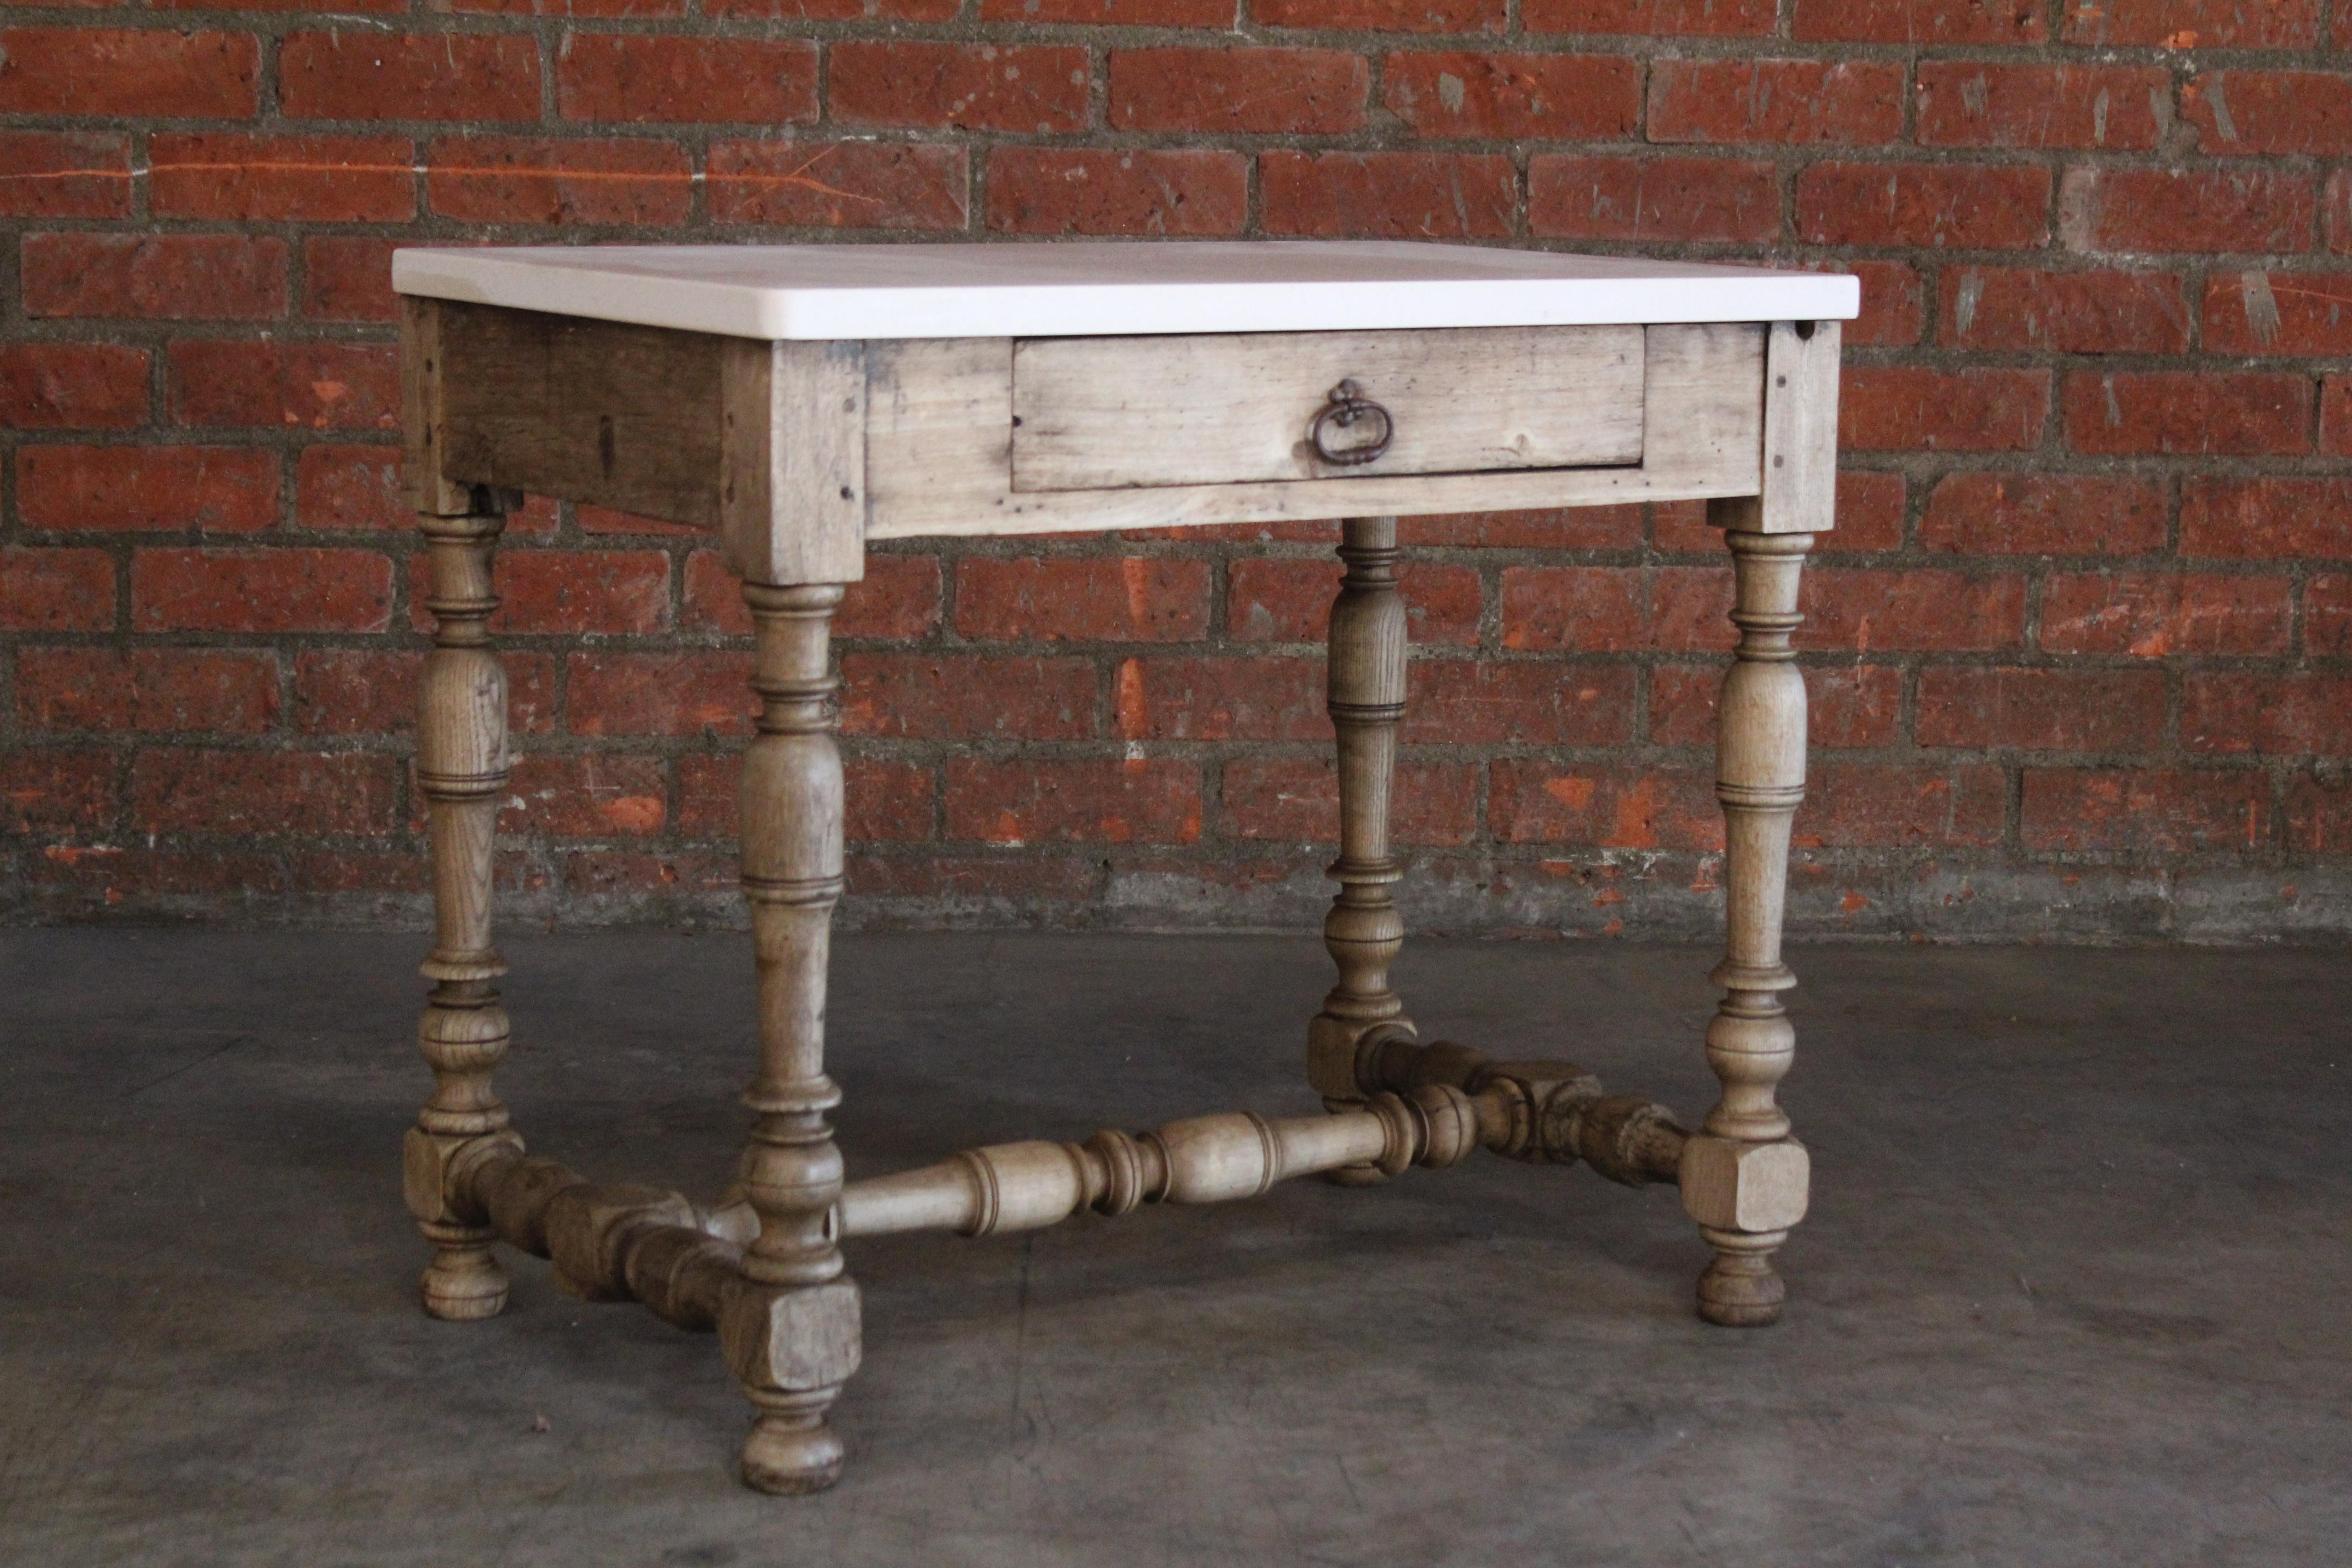 An antique 18th century console table with drawer in oak. New French limestone top. In good condition with a beautiful patina to the oak frame. The table has been lightly waxed and joints reinforced. Original iron drawer pull shows patina.